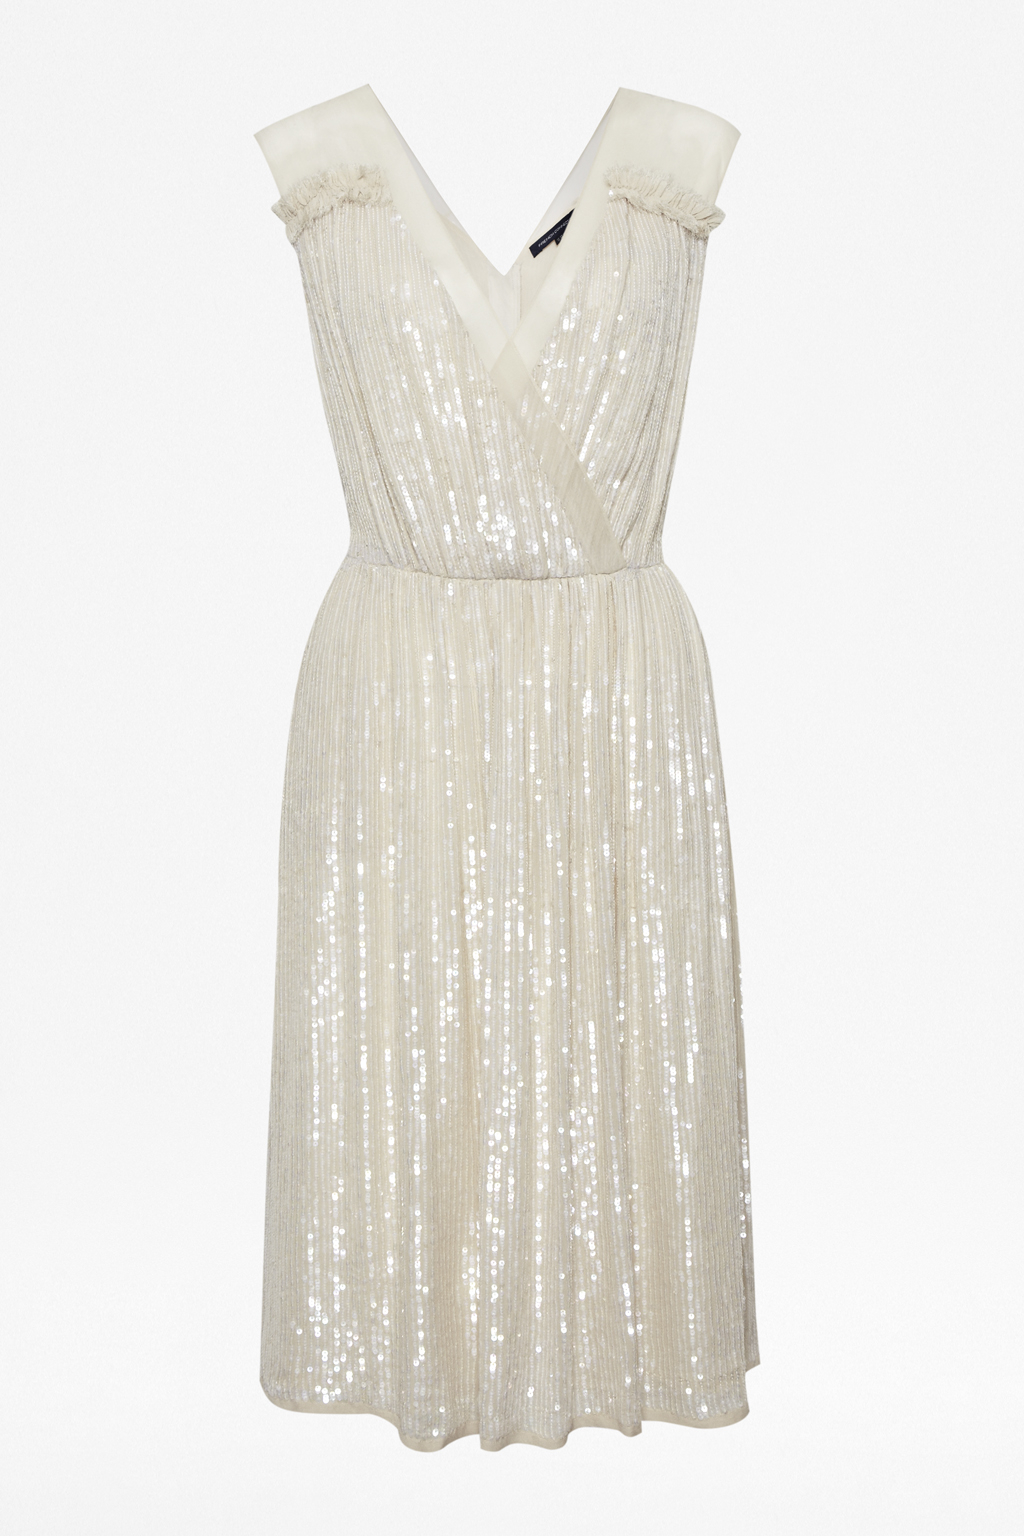 French Connection Riviera Mist Sequin Dress in Sand (Natural) - Lyst